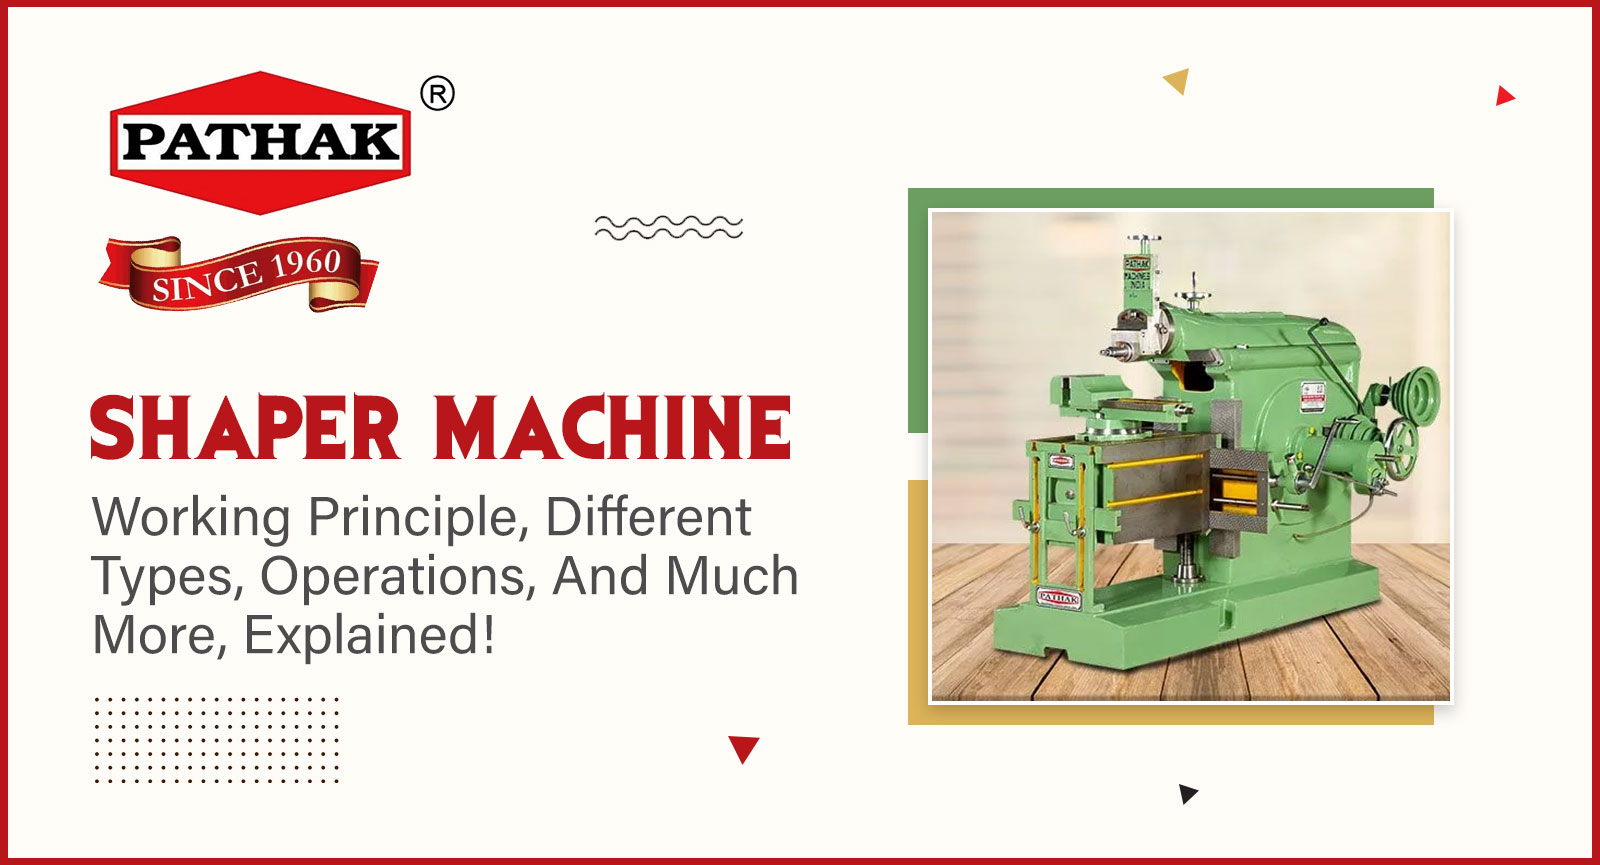 Shaper Machine: Working Principle, Different Types, Operations